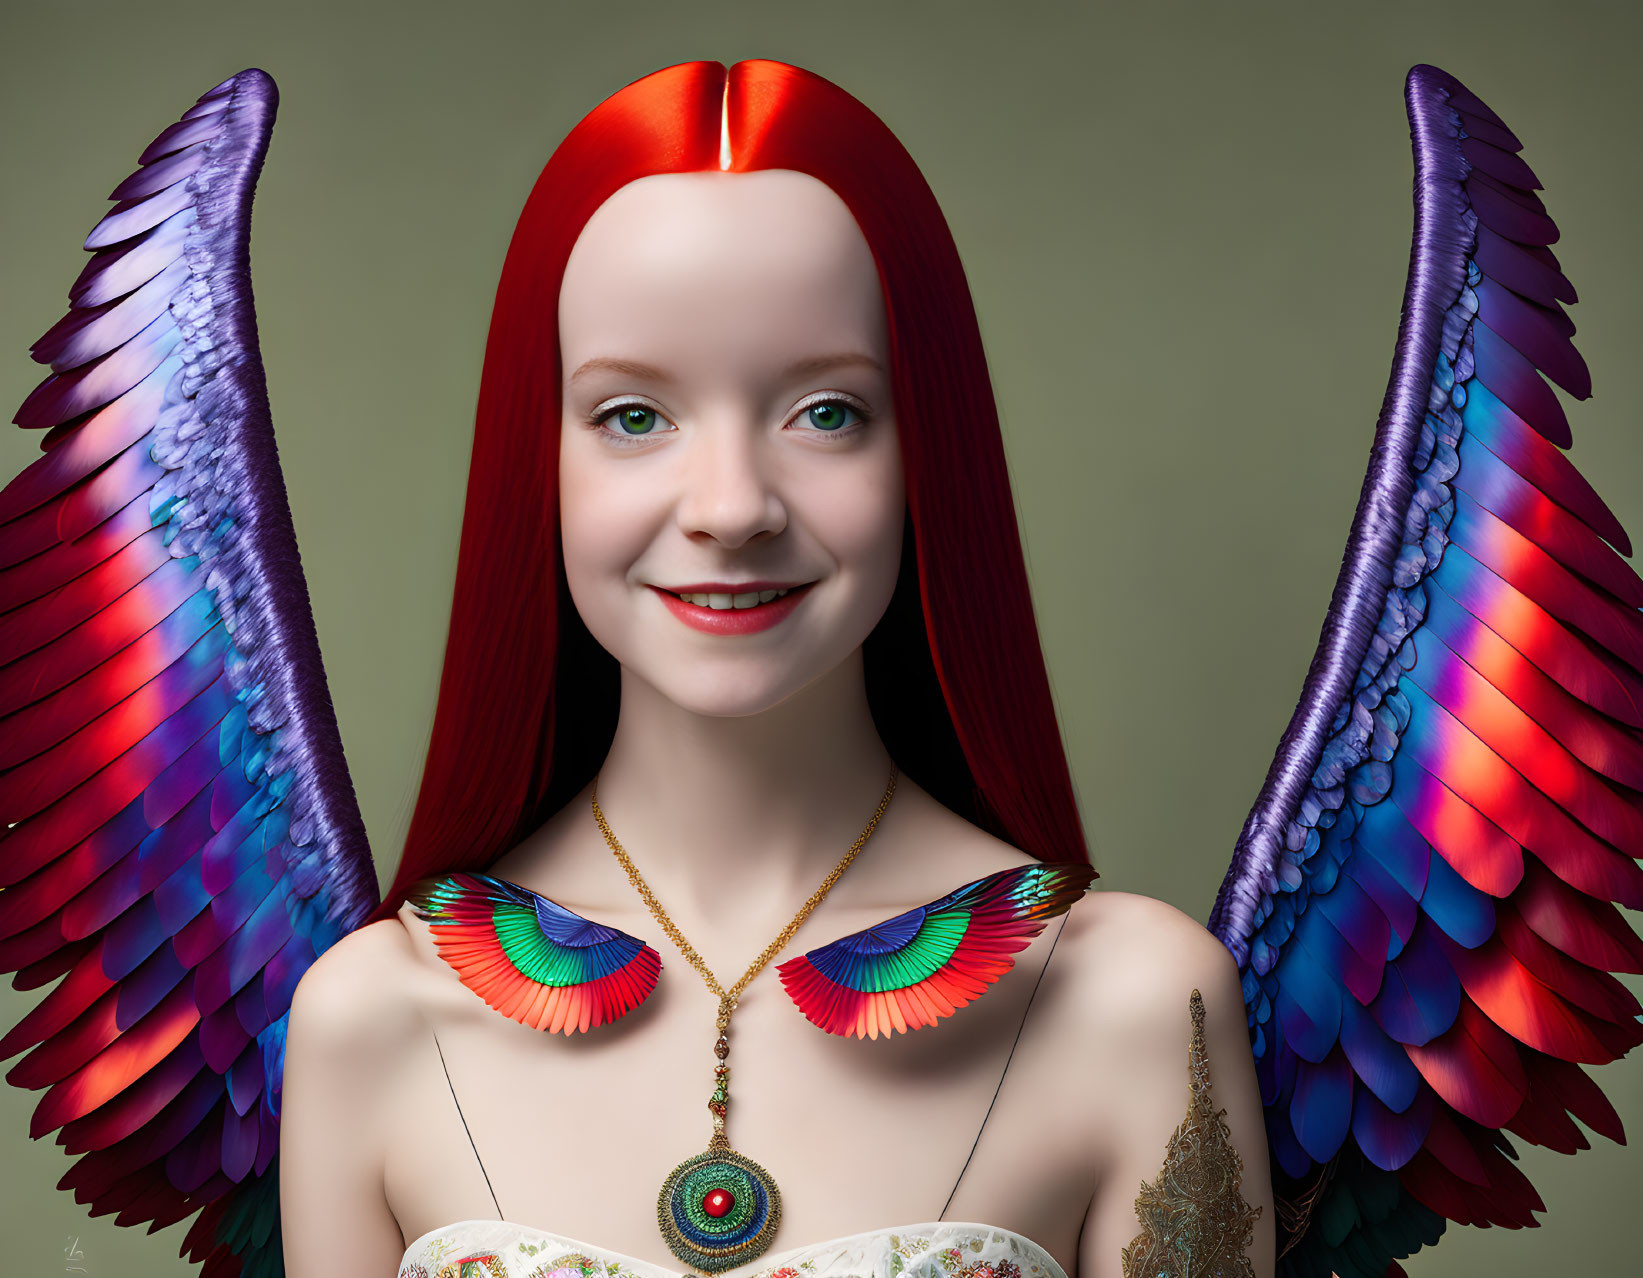 Colorful digital artwork of a smiling female figure with red hair, angel wings, peacock feather necklace